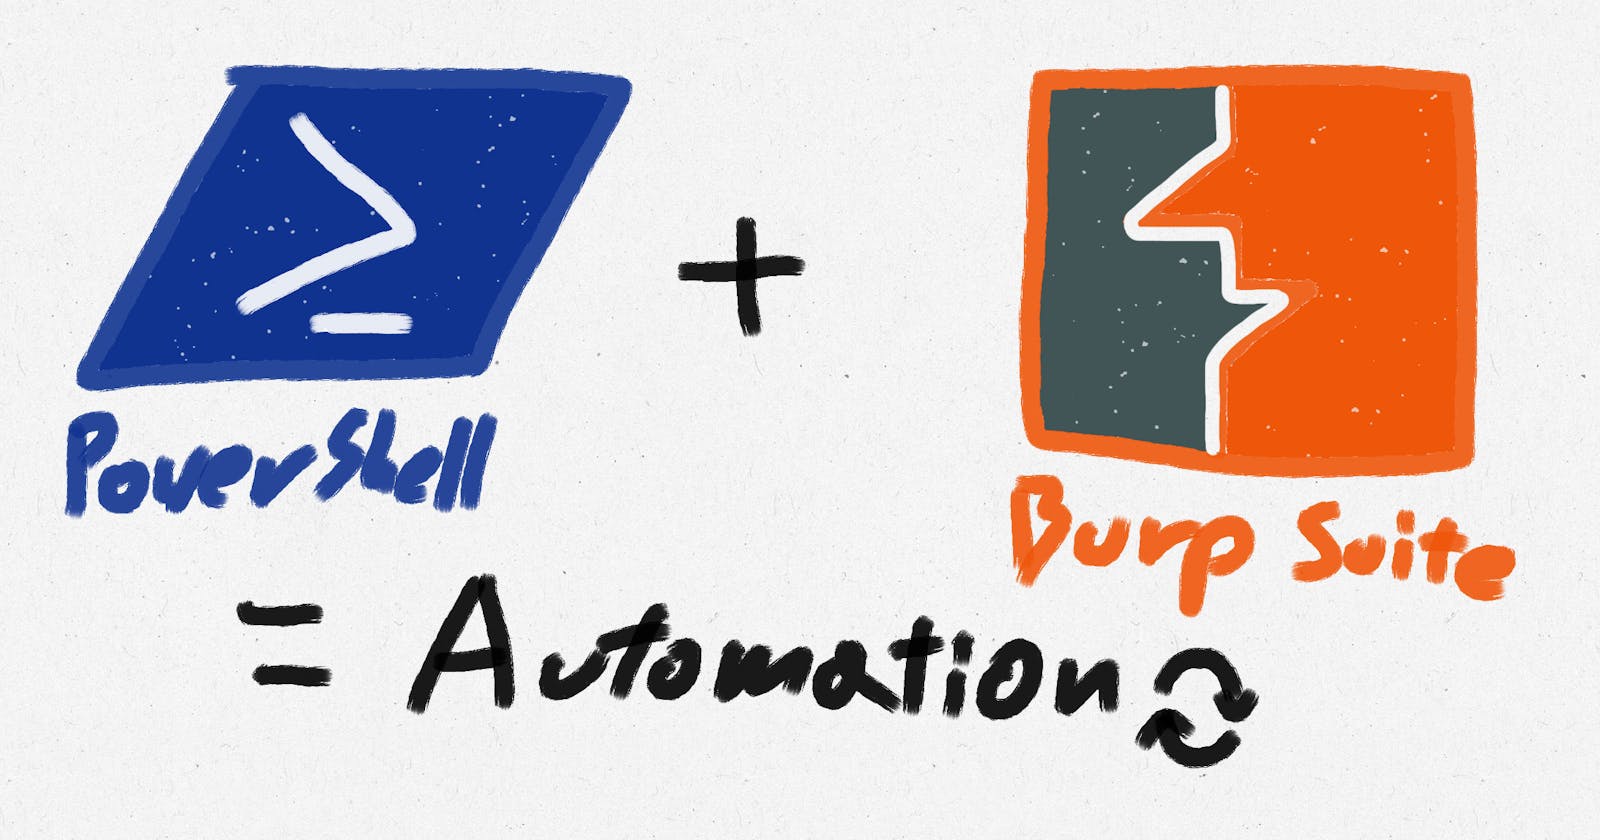 Automate Azure tasks using Powershell and Burp Suite